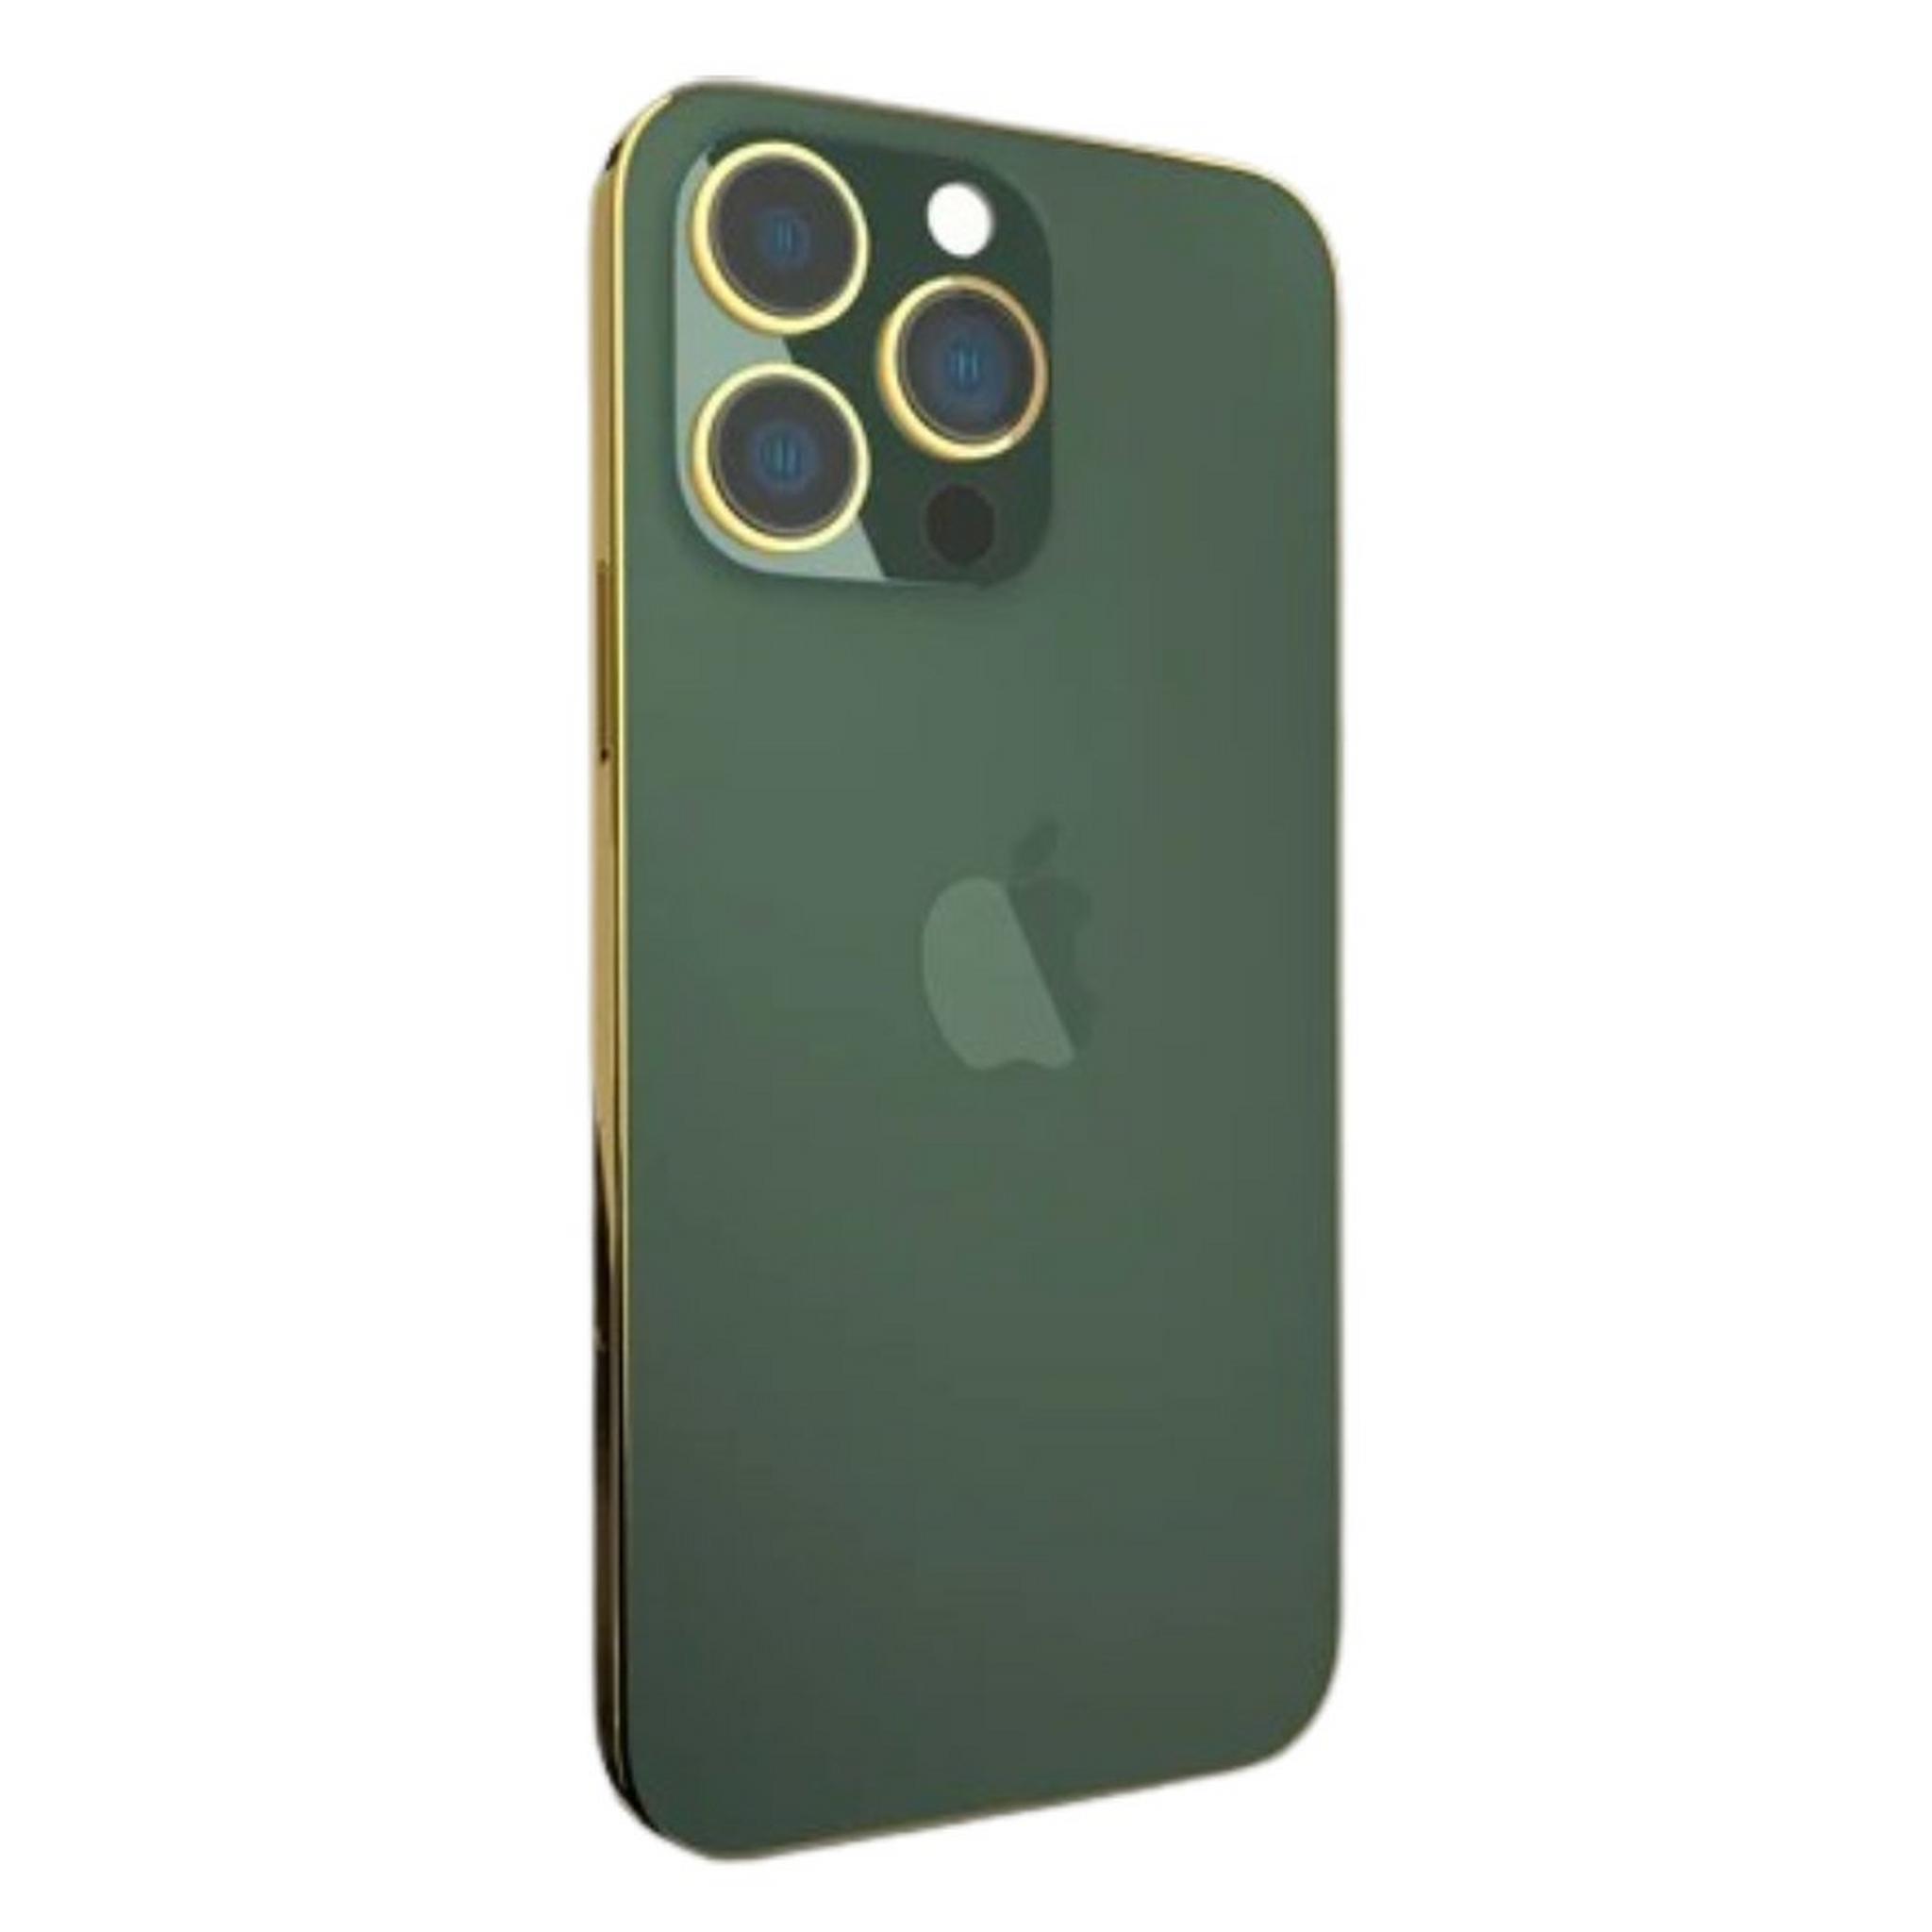 Givori iPhone 13 Pro Max 256GB Gold Plated Frame - Green